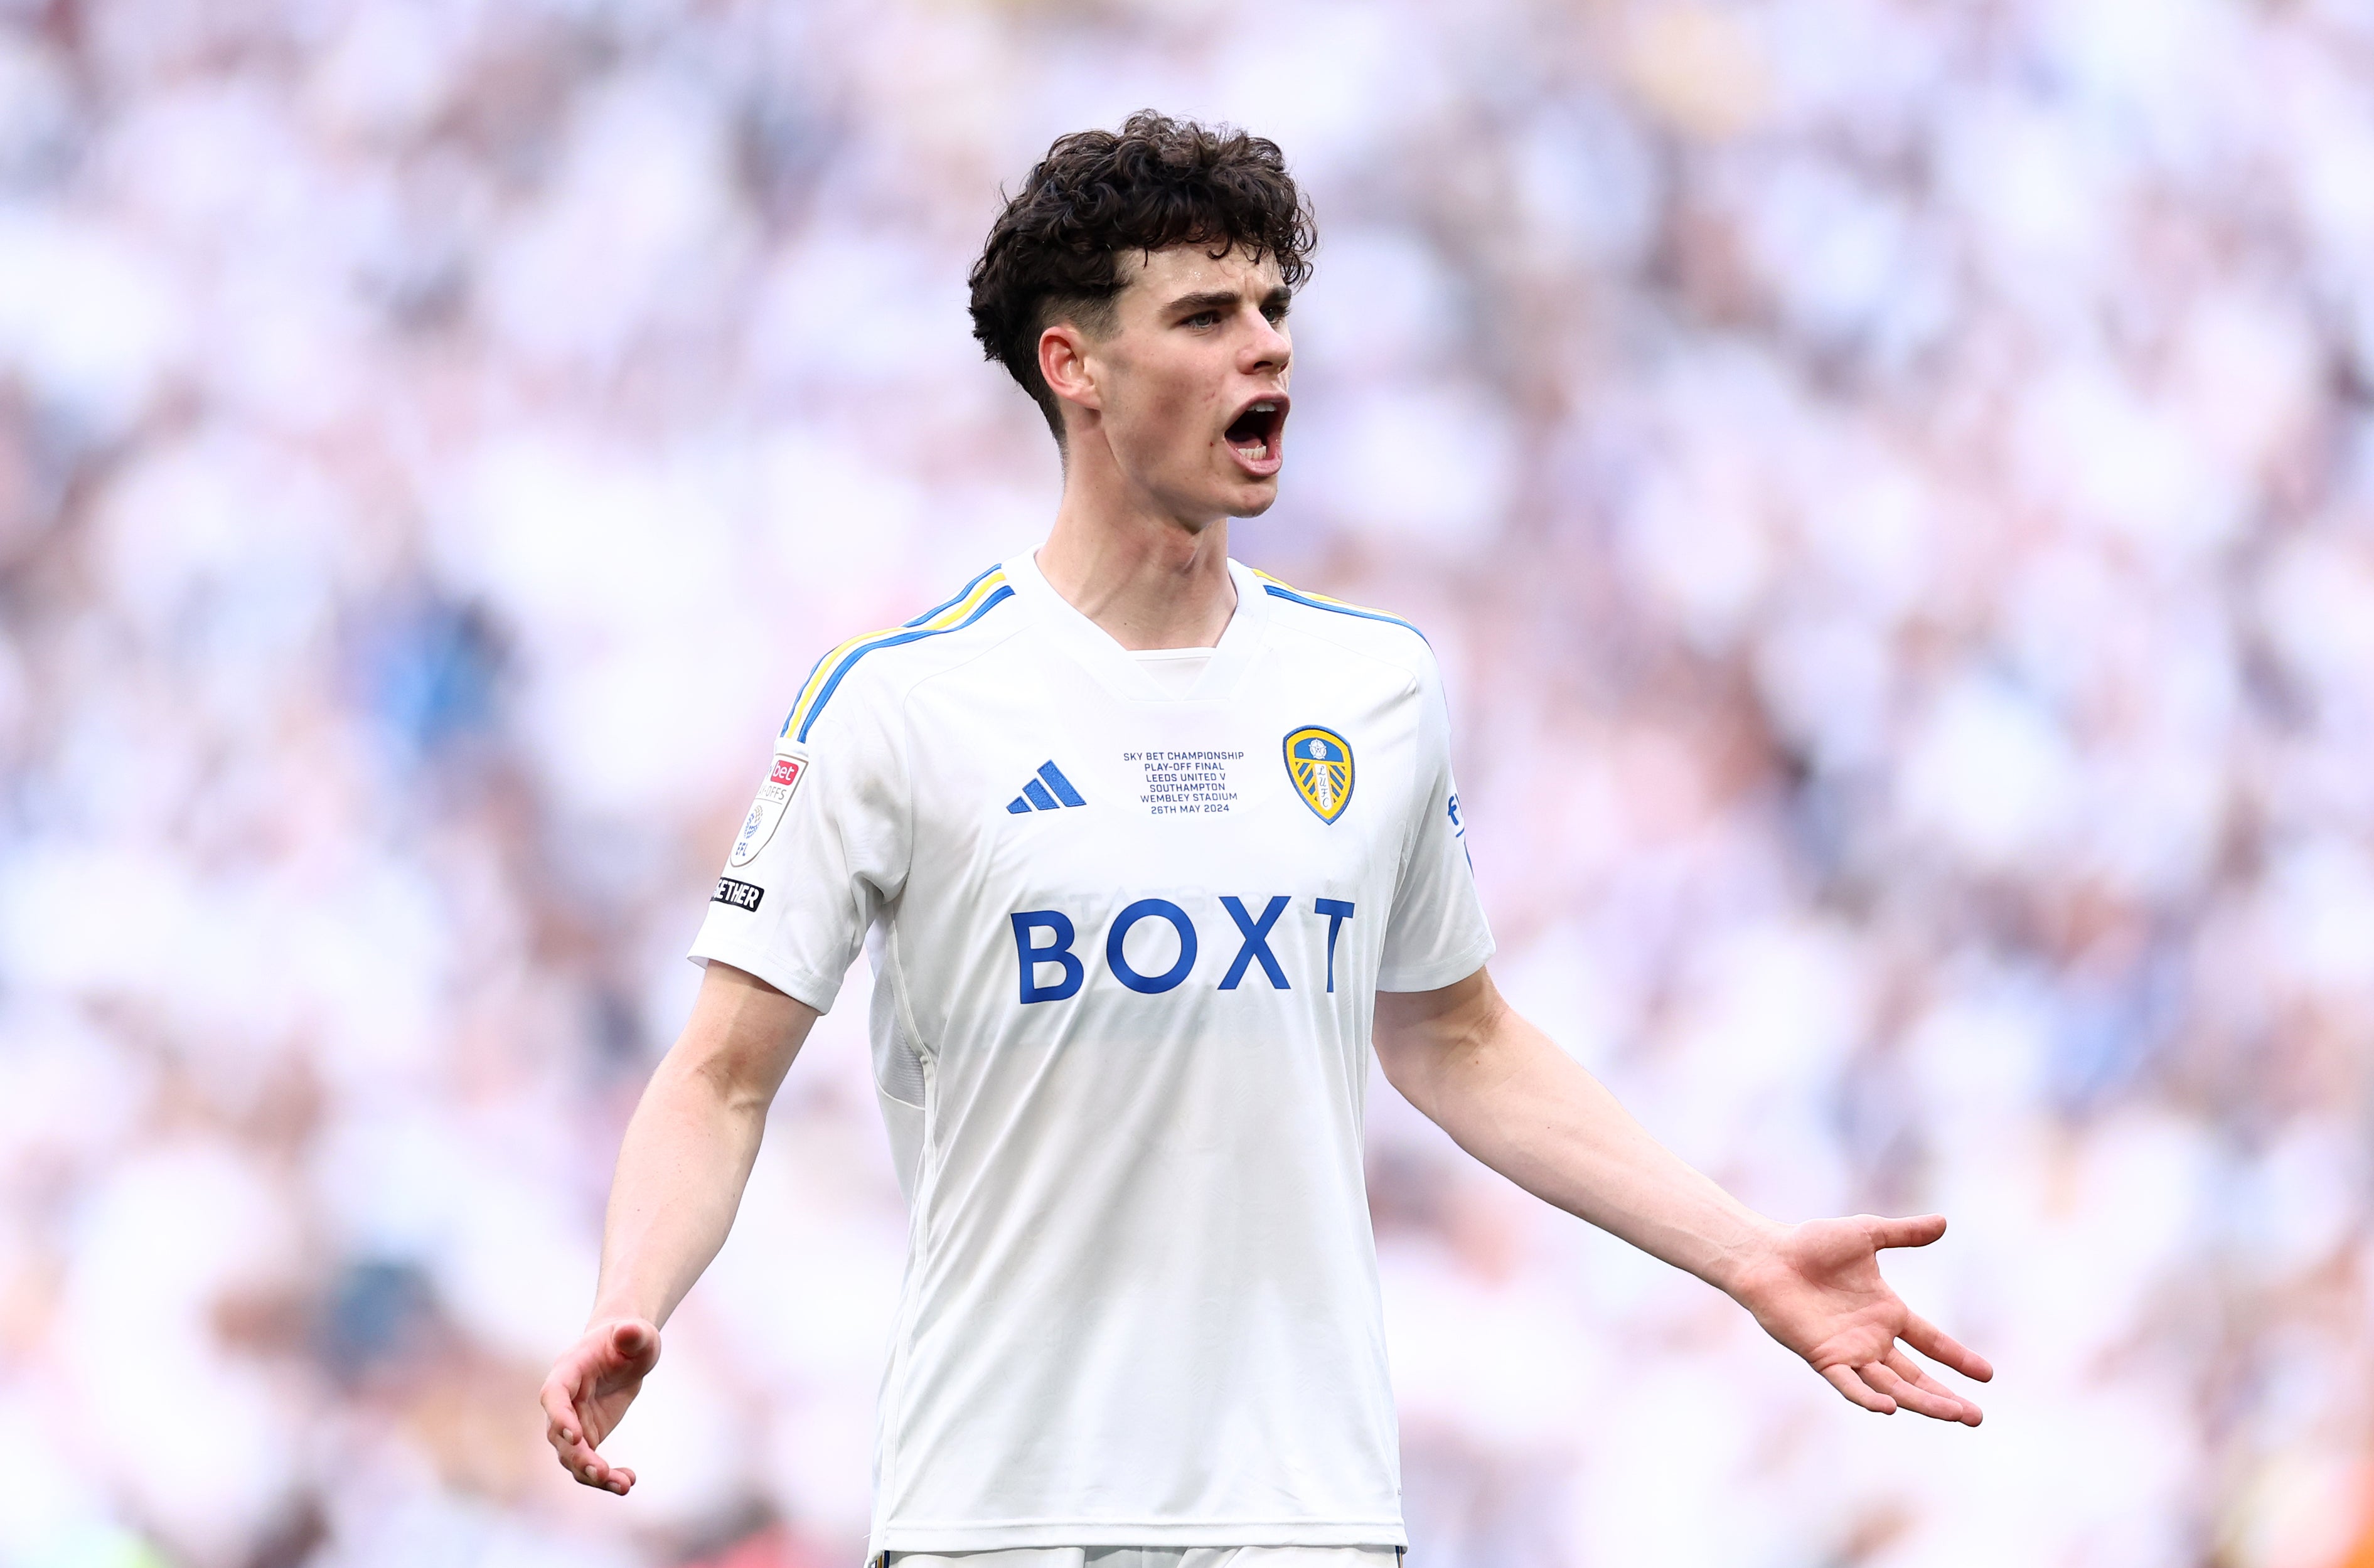 Archie Gray has left Leeds United after impressing in the Championship